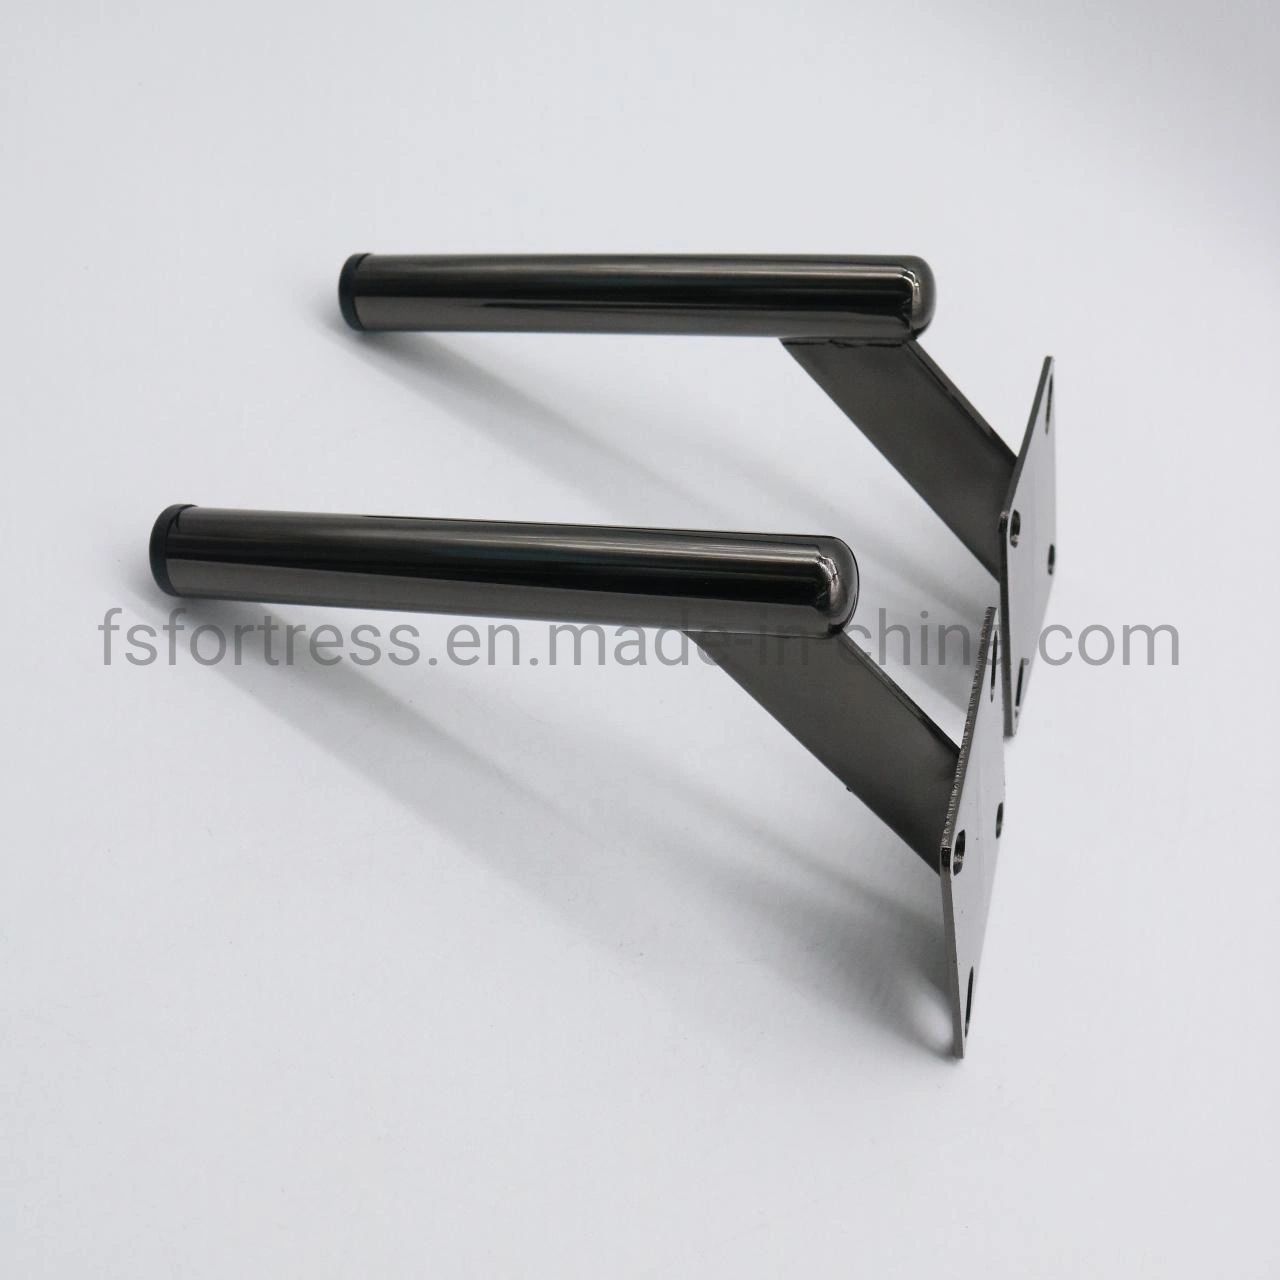 Furniture Legs Accessories Industrial Table Legs Metallic Base for Round Table